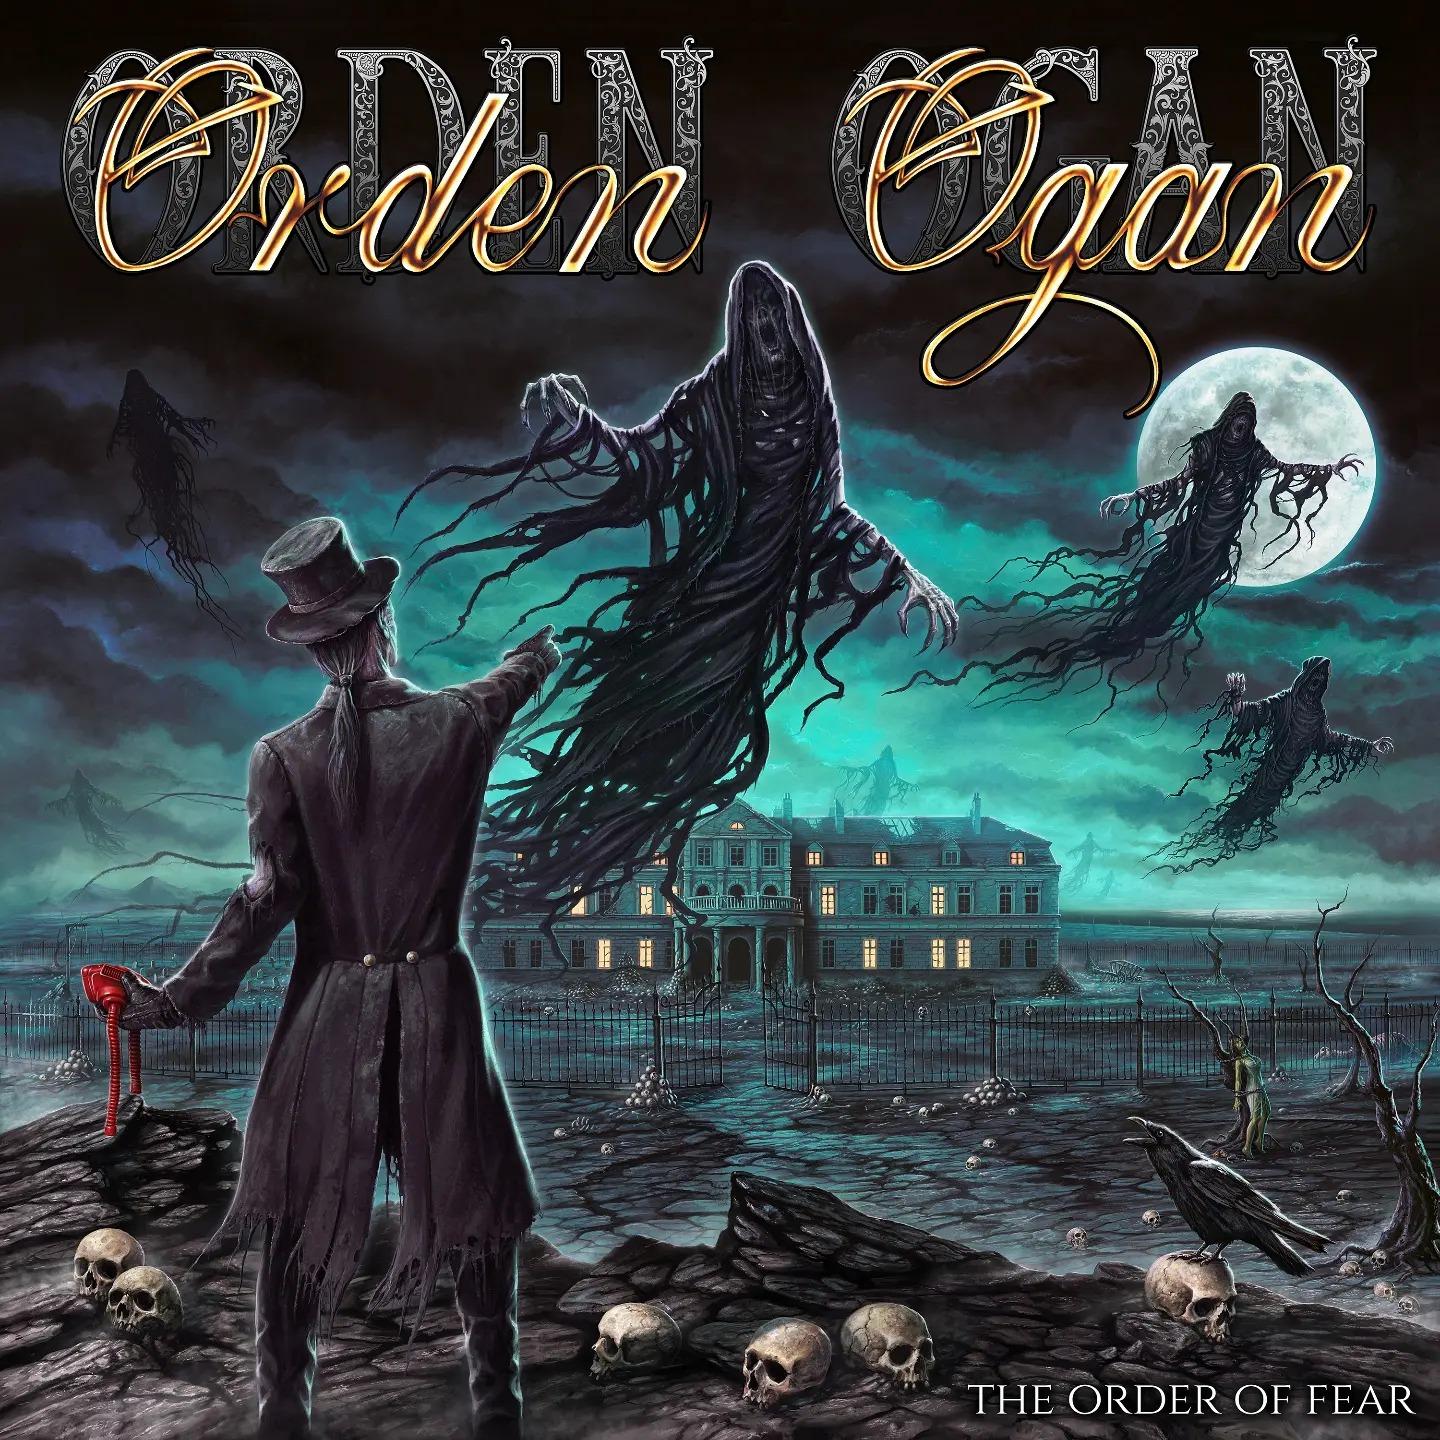 The order of fear artwork